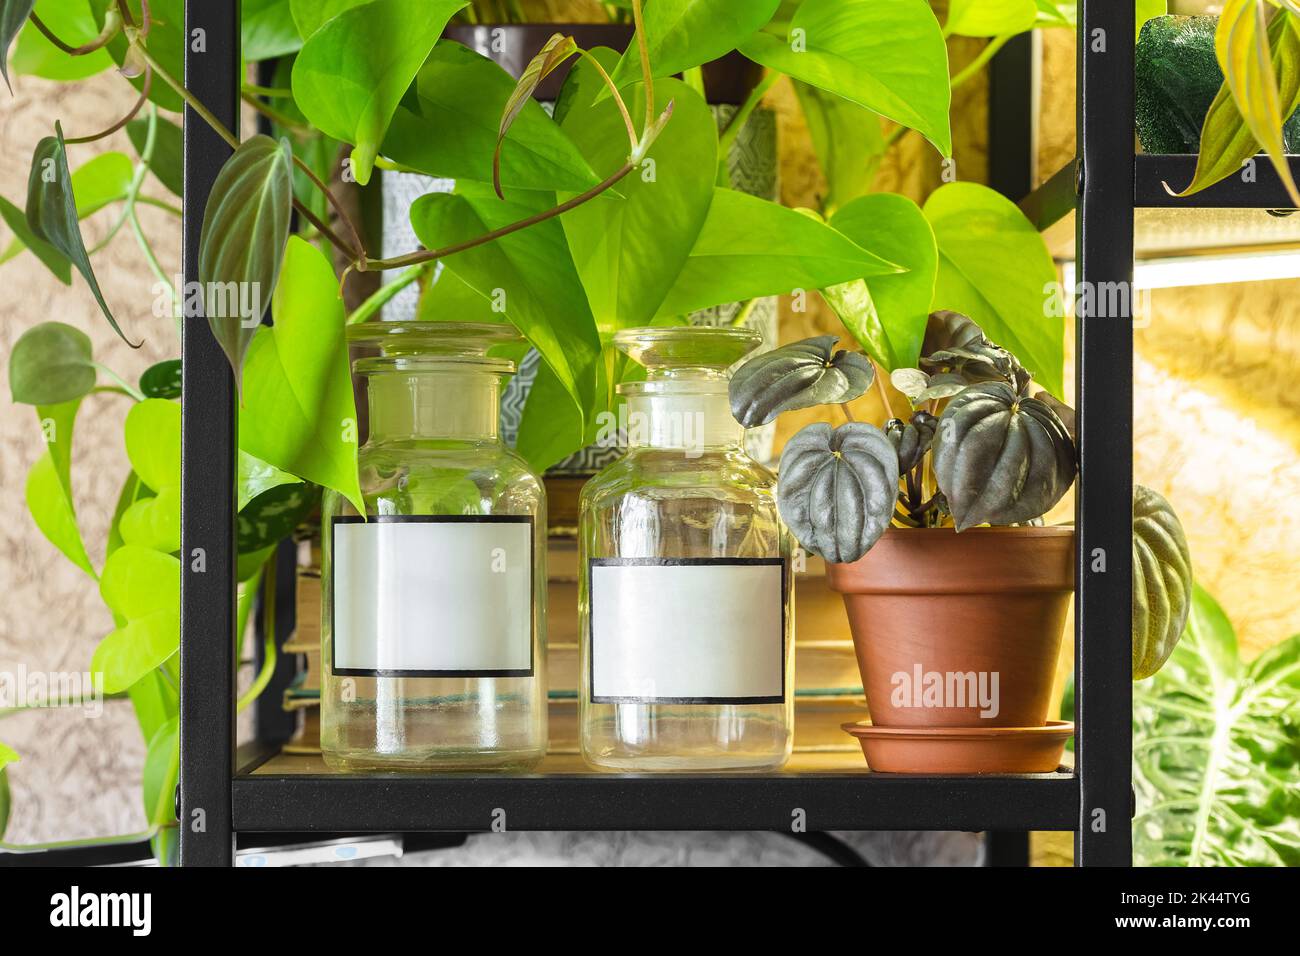 Blank label apothecary or medical jars with potted plants Epipremnum Neon, Peperomia Silver on the black metal industrial style shelf. Home garden ind Stock Photo